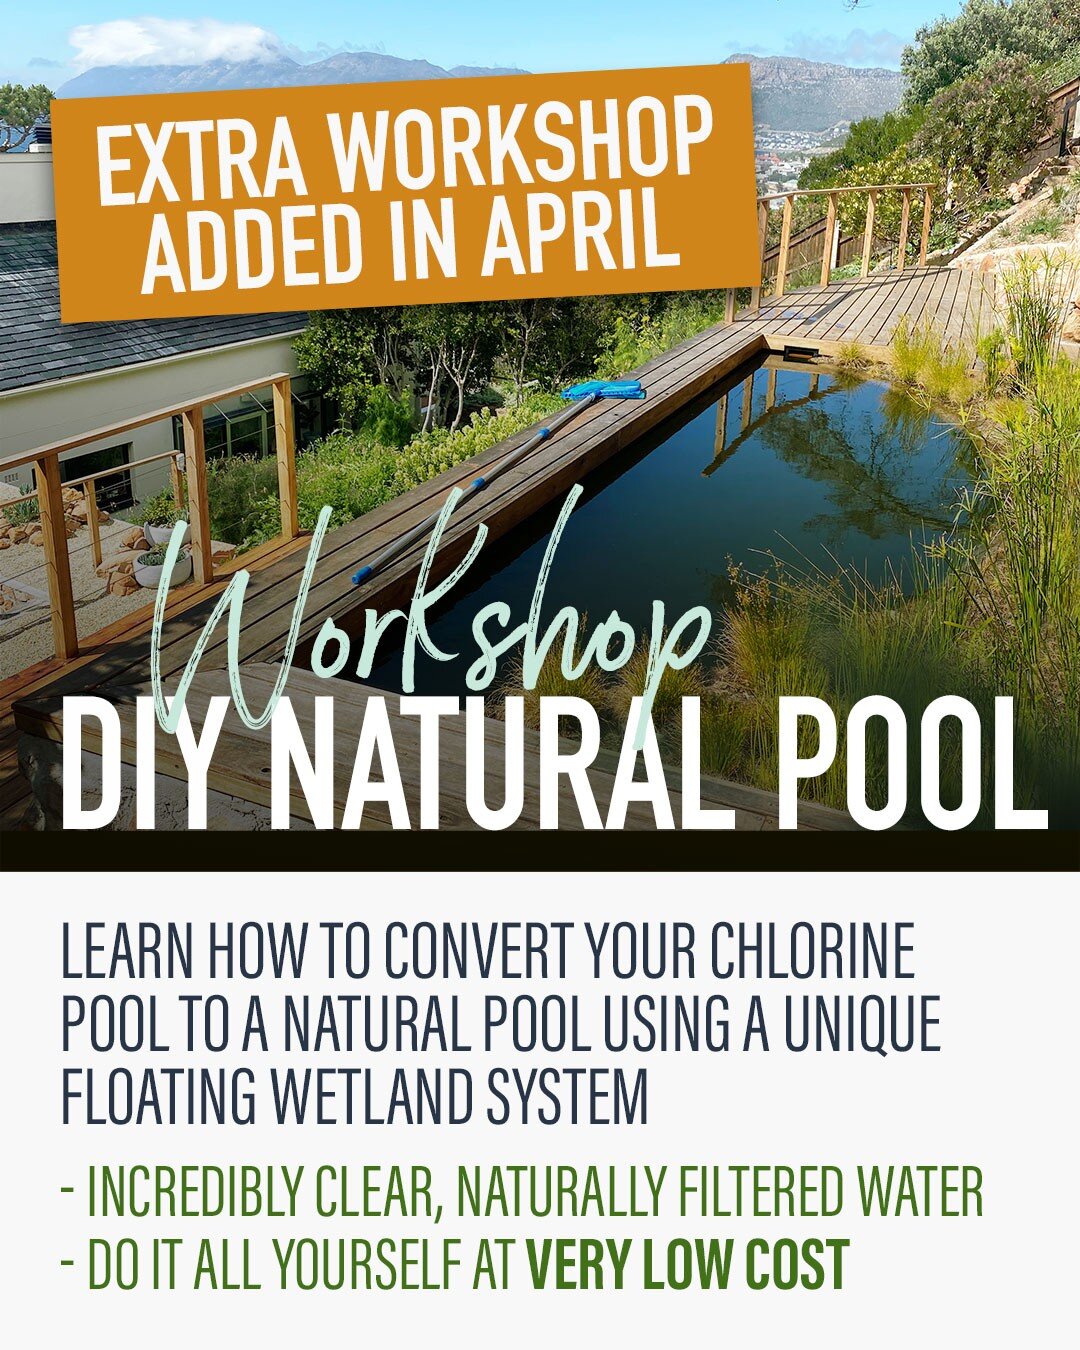 Learn how to convert your chlorine pool to a natural pool using a unique floating wetland system.
* Incredibly clear, naturally filtered water 
* Do it all yourself at very low cost

WHAT ARE FLOATING WETLANDS?
They are a floating structures about 15